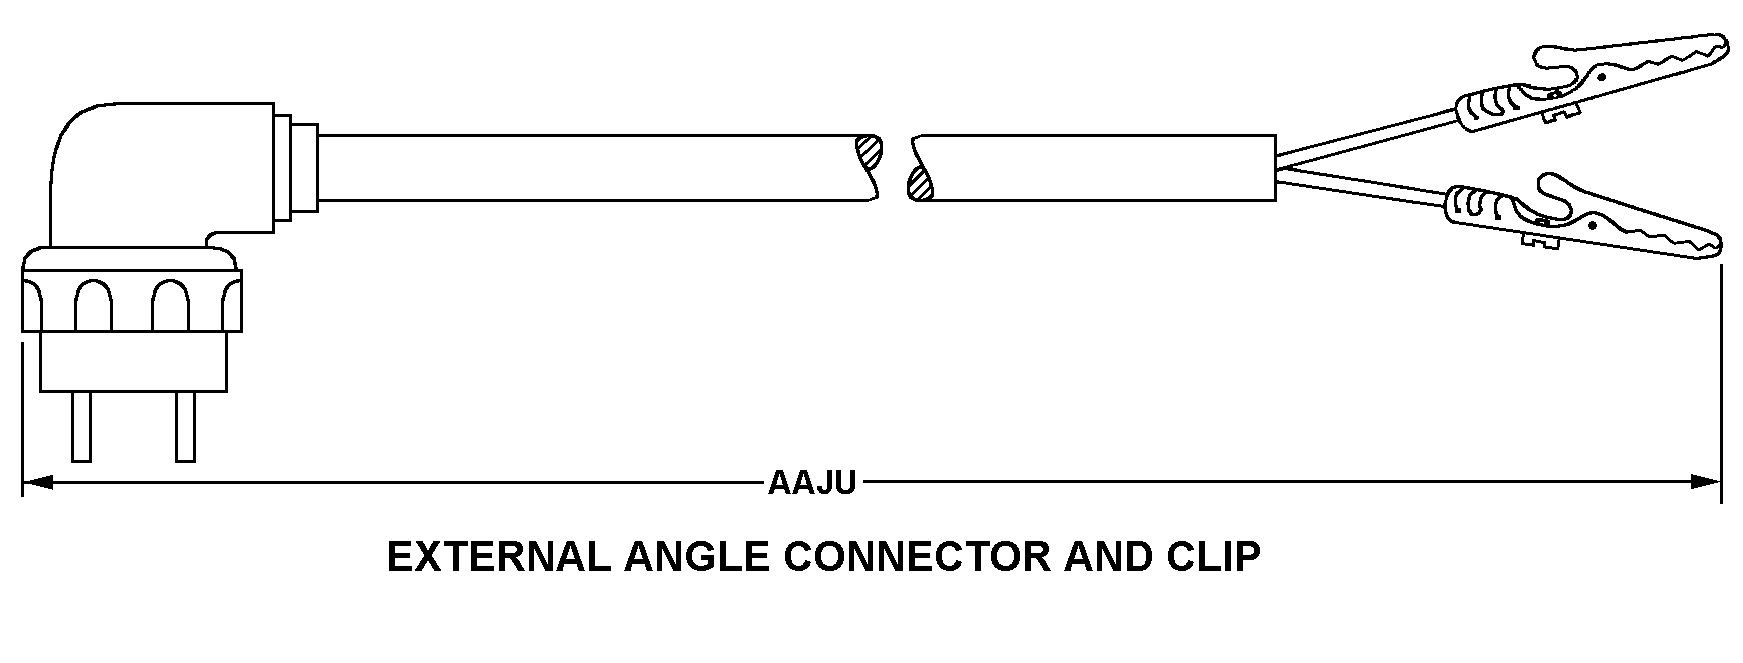 EXTERNAL ANGLE CONNECTOR AND CLIP style nsn 6150-00-234-6996